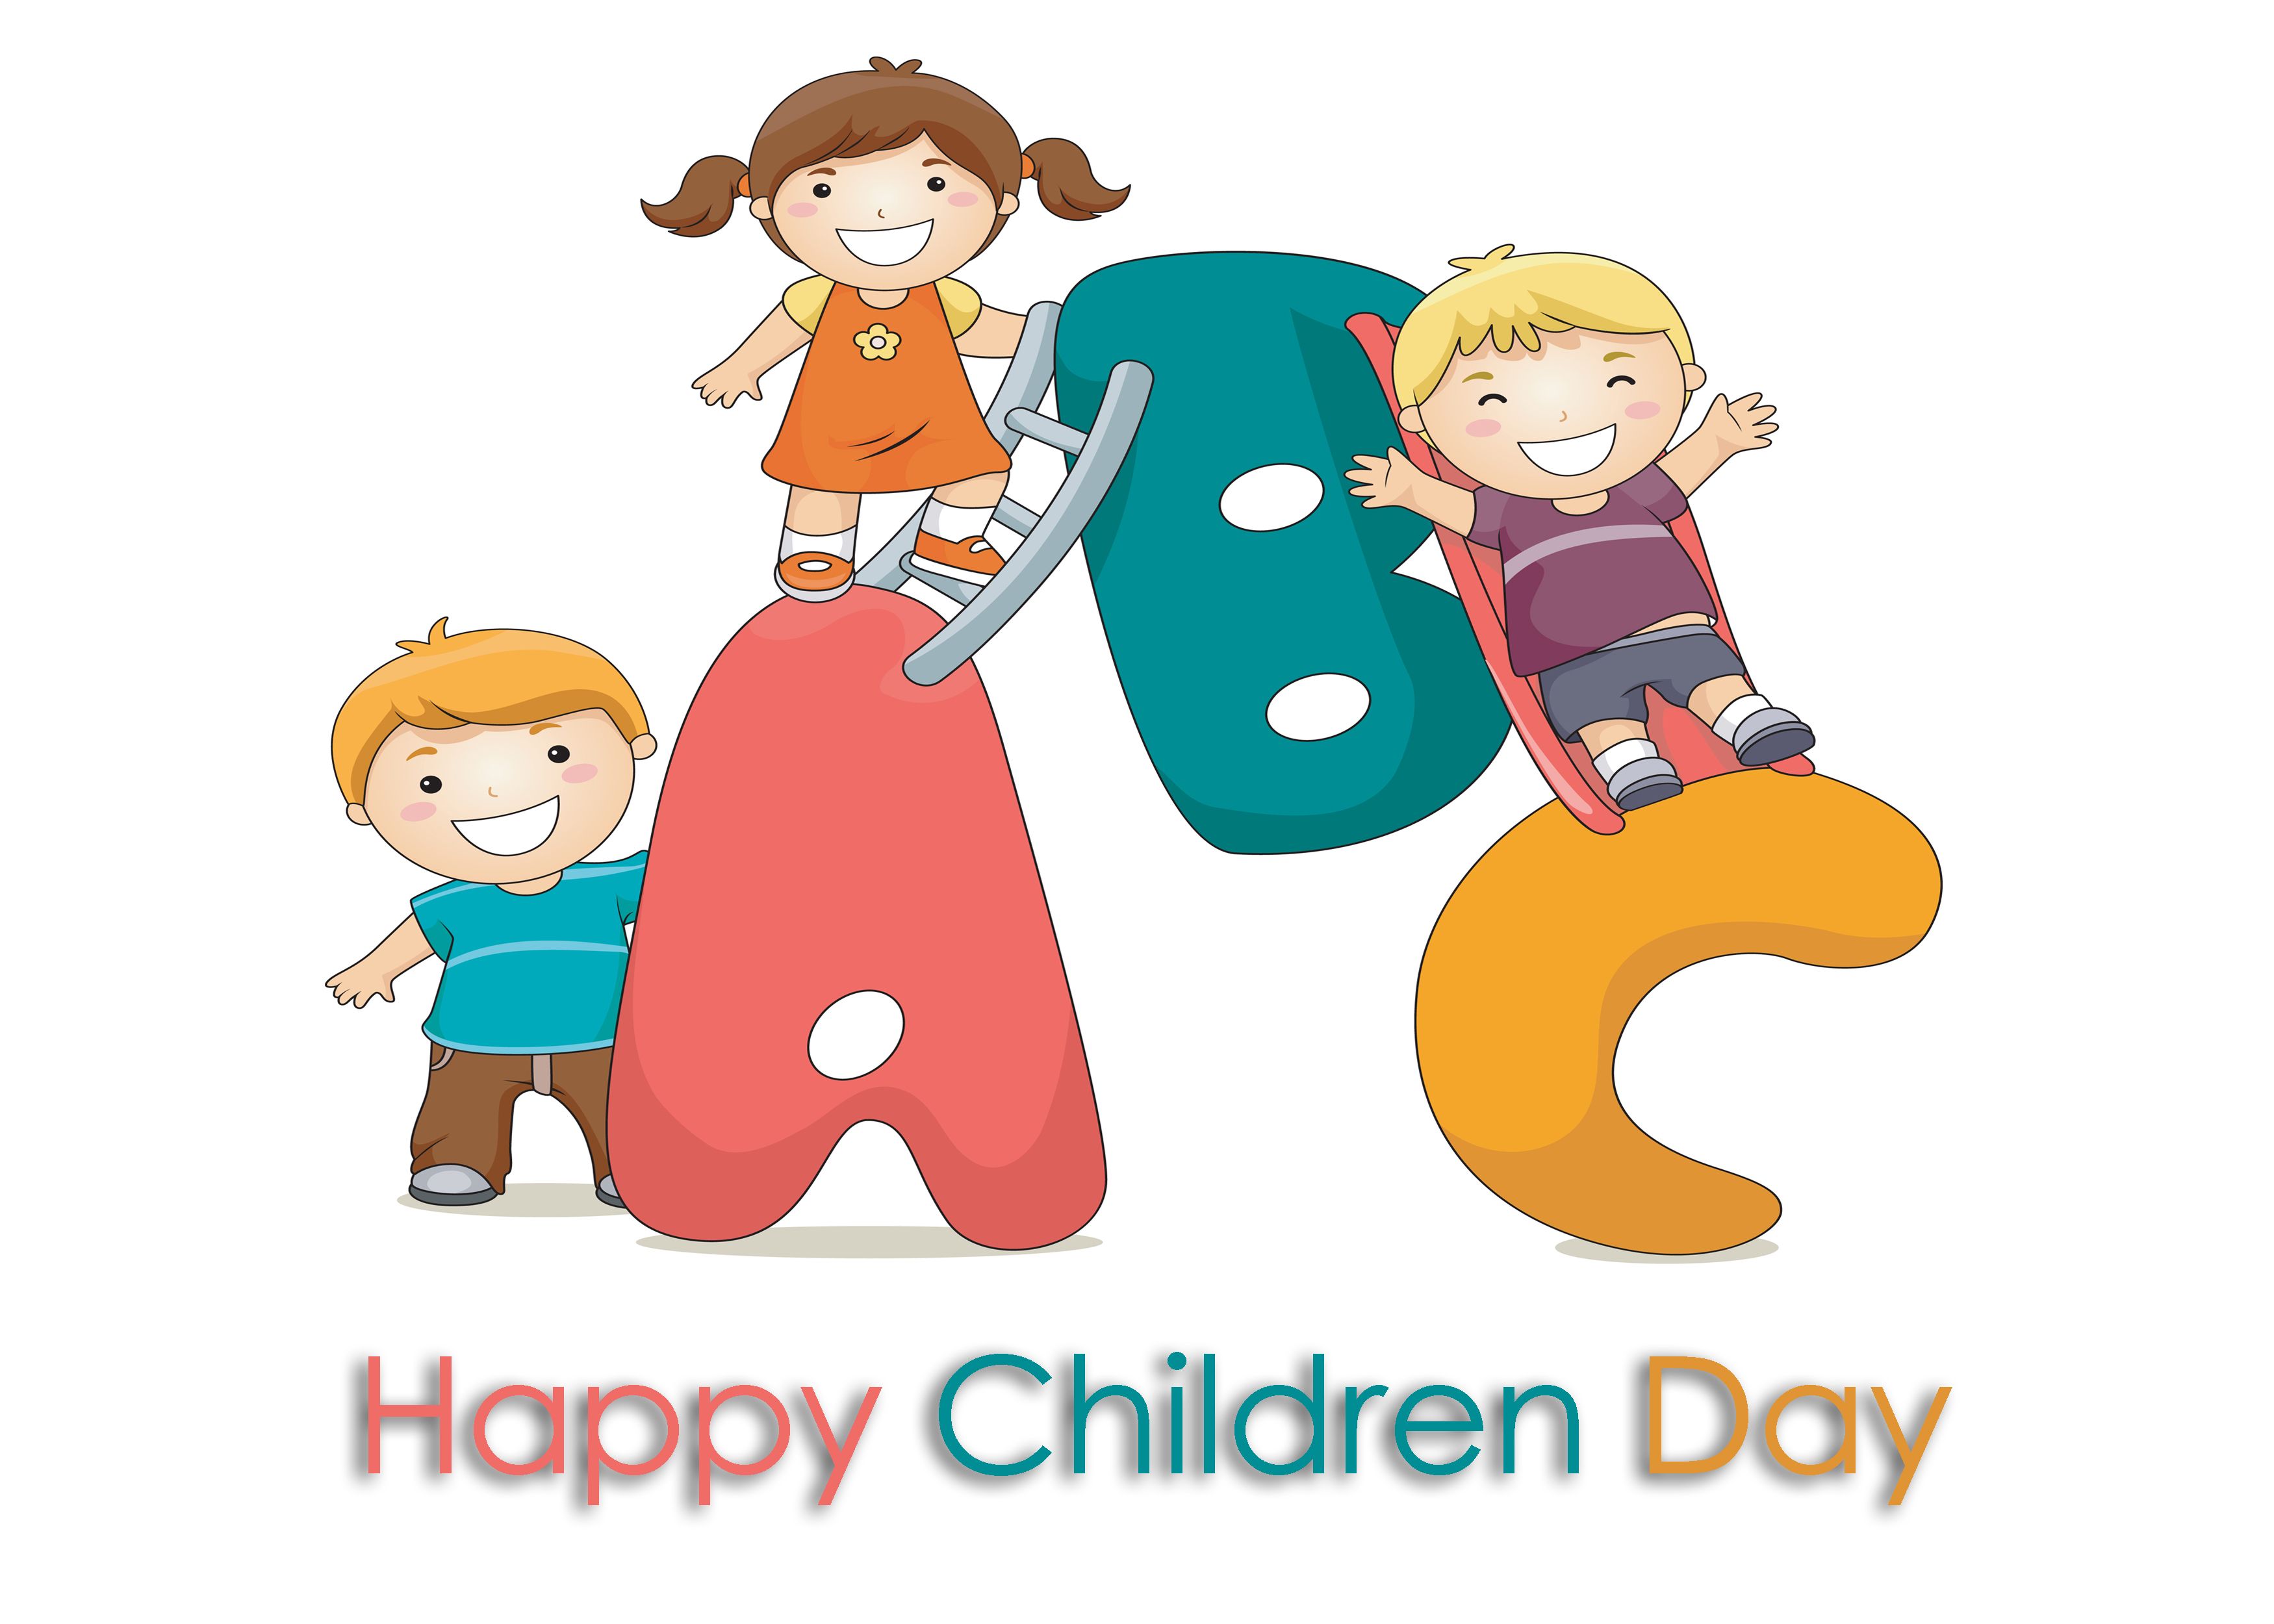 Happy Childrens Day Hd Images Happy Childrens Day,hd - Kids Play , HD Wallpaper & Backgrounds